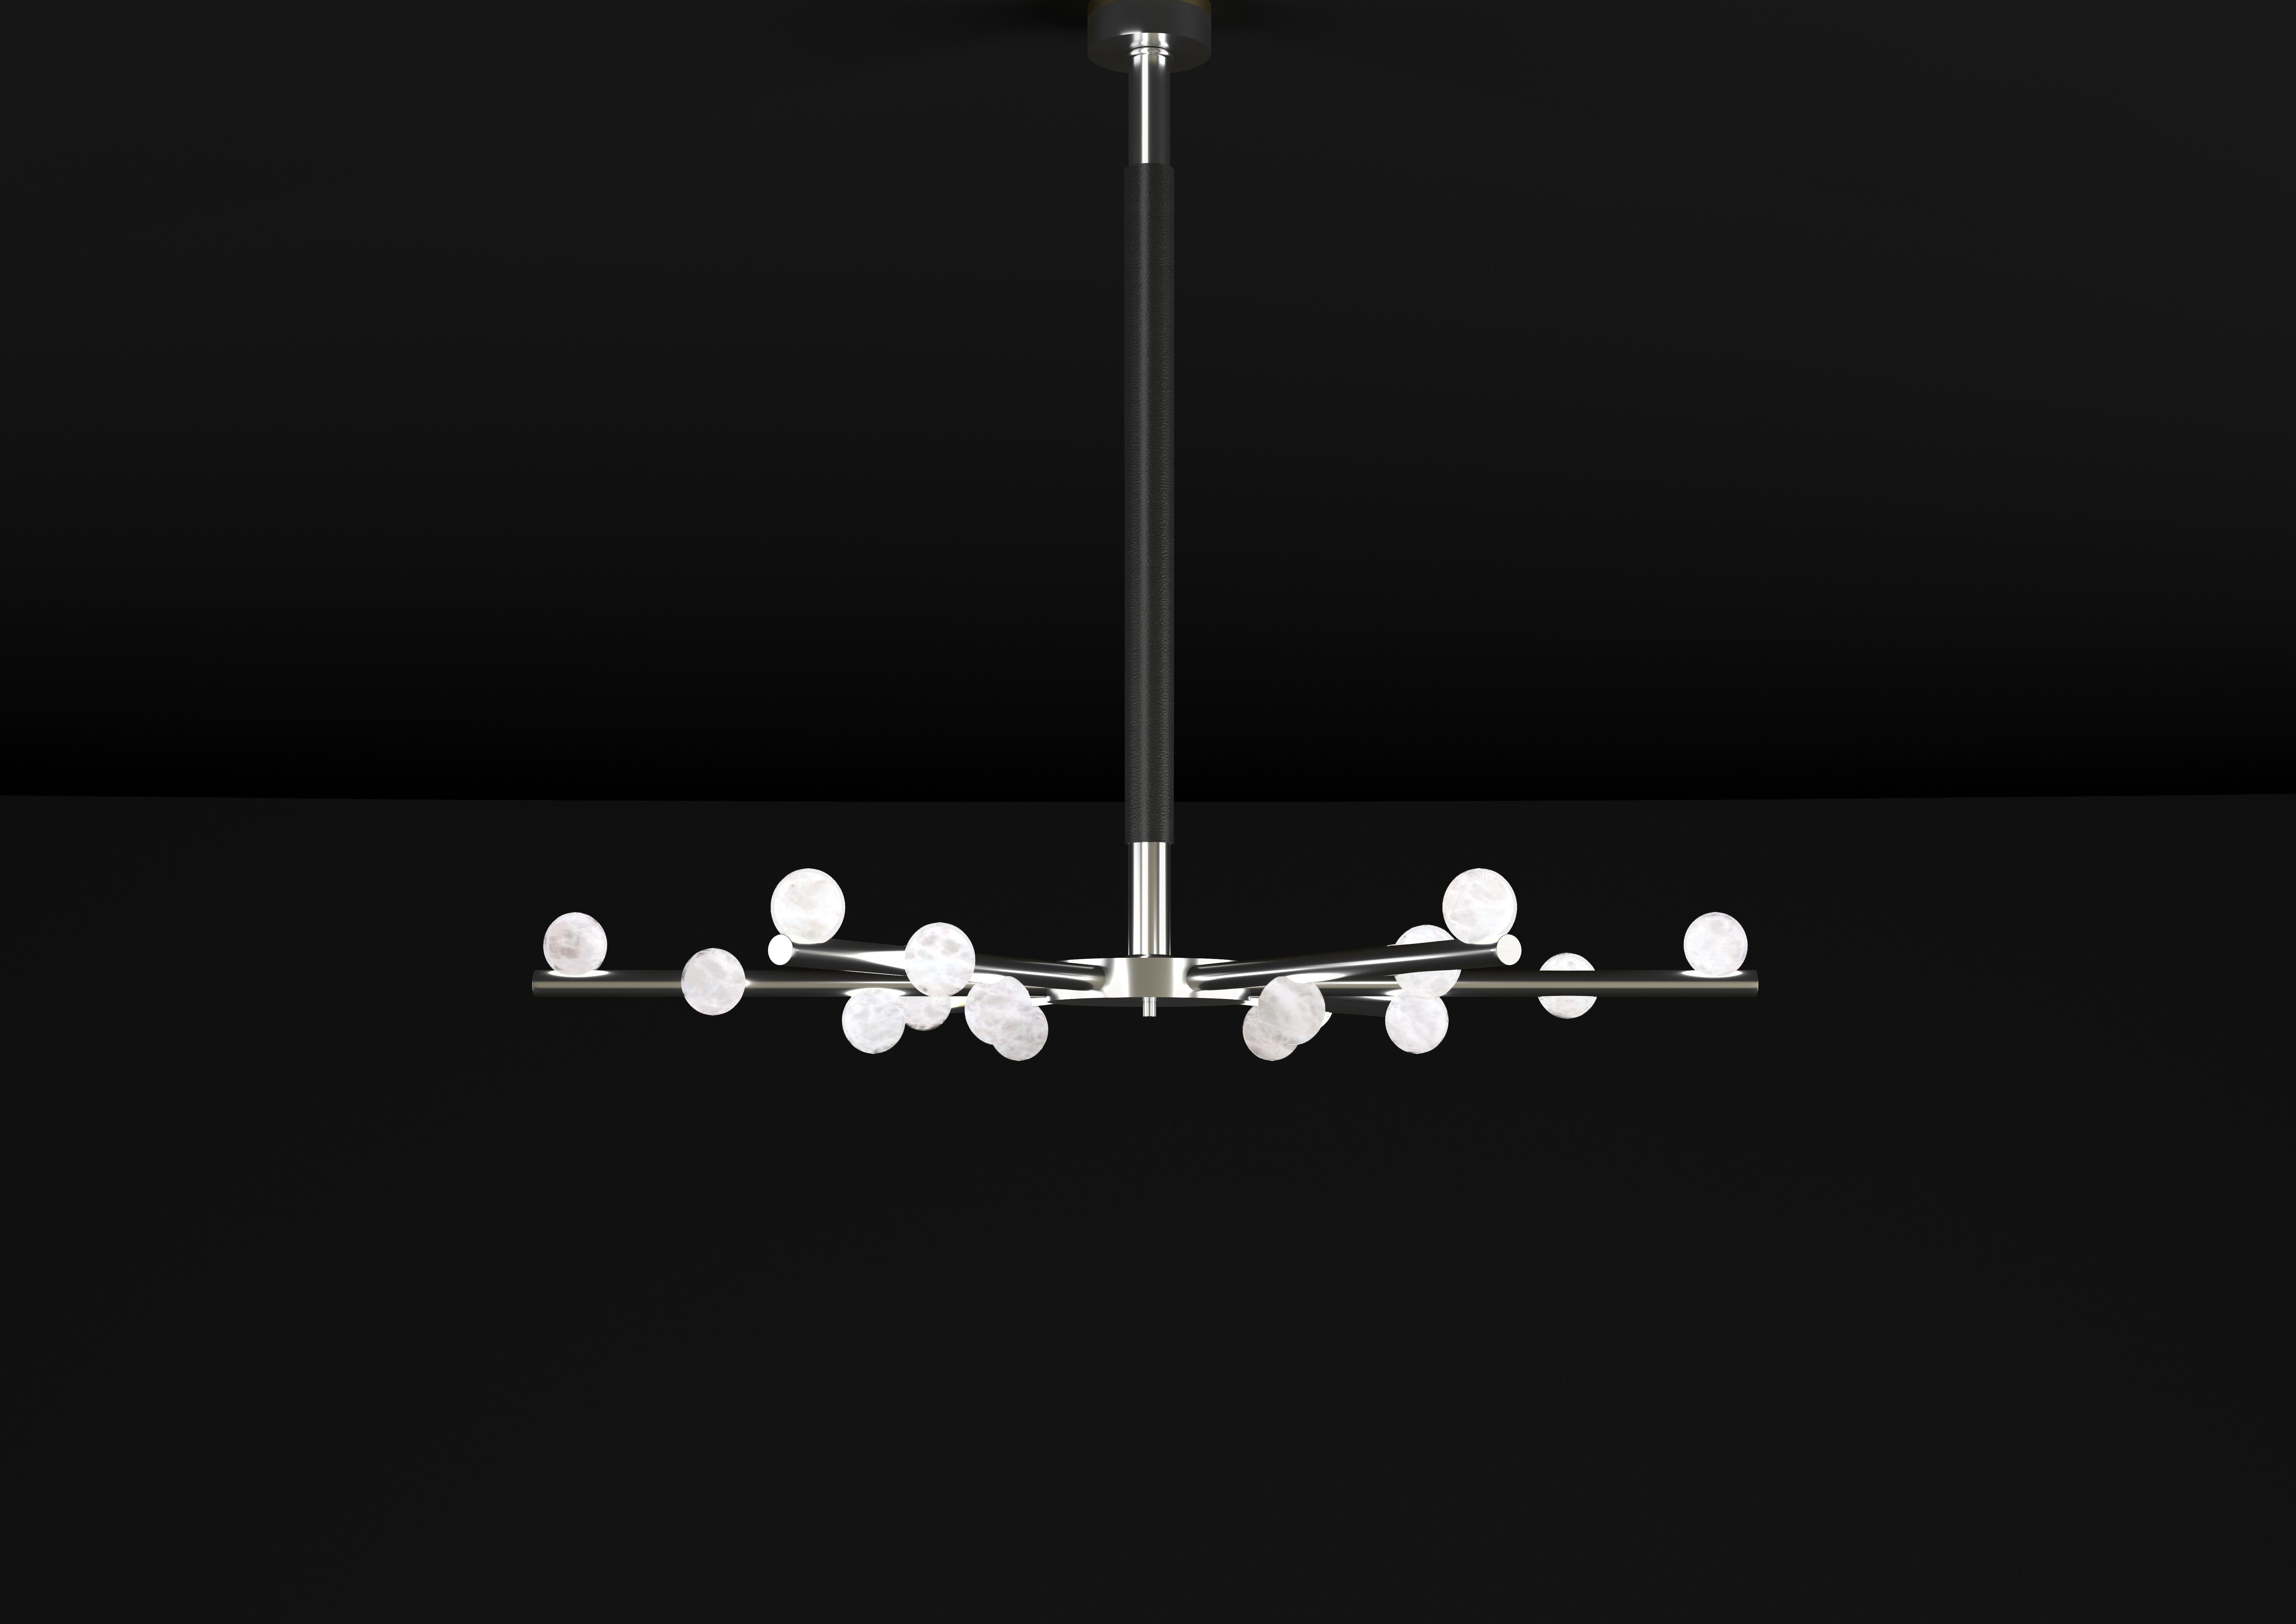 Demetra Shiny Silver Metal Chandelier by Alabastro Italiano
Dimensions: D 85 x W 97 x H 85 cm.
Materials: White alabaster, shiny silver metal and leather.

Available in different finishes: Shiny Silver, Bronze, Brushed Brass, Ruggine of Florence,